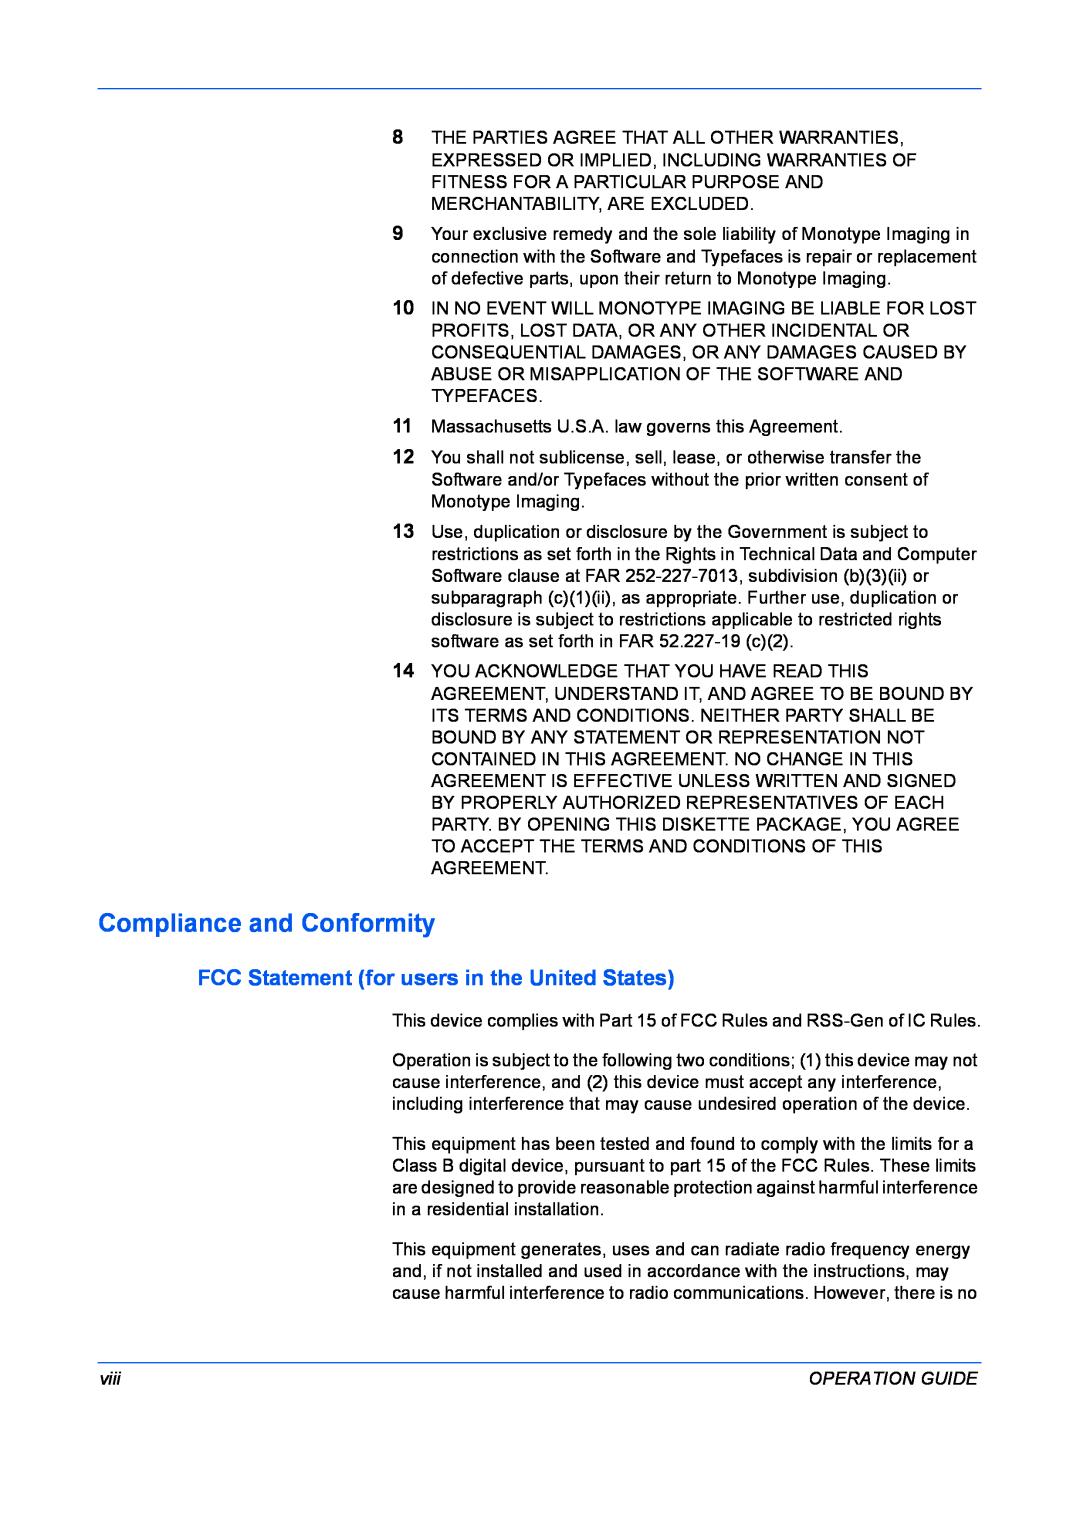 Kyocera FS-9530DN manual Compliance and Conformity, FCC Statement for users in the United States, viii, Operation Guide 